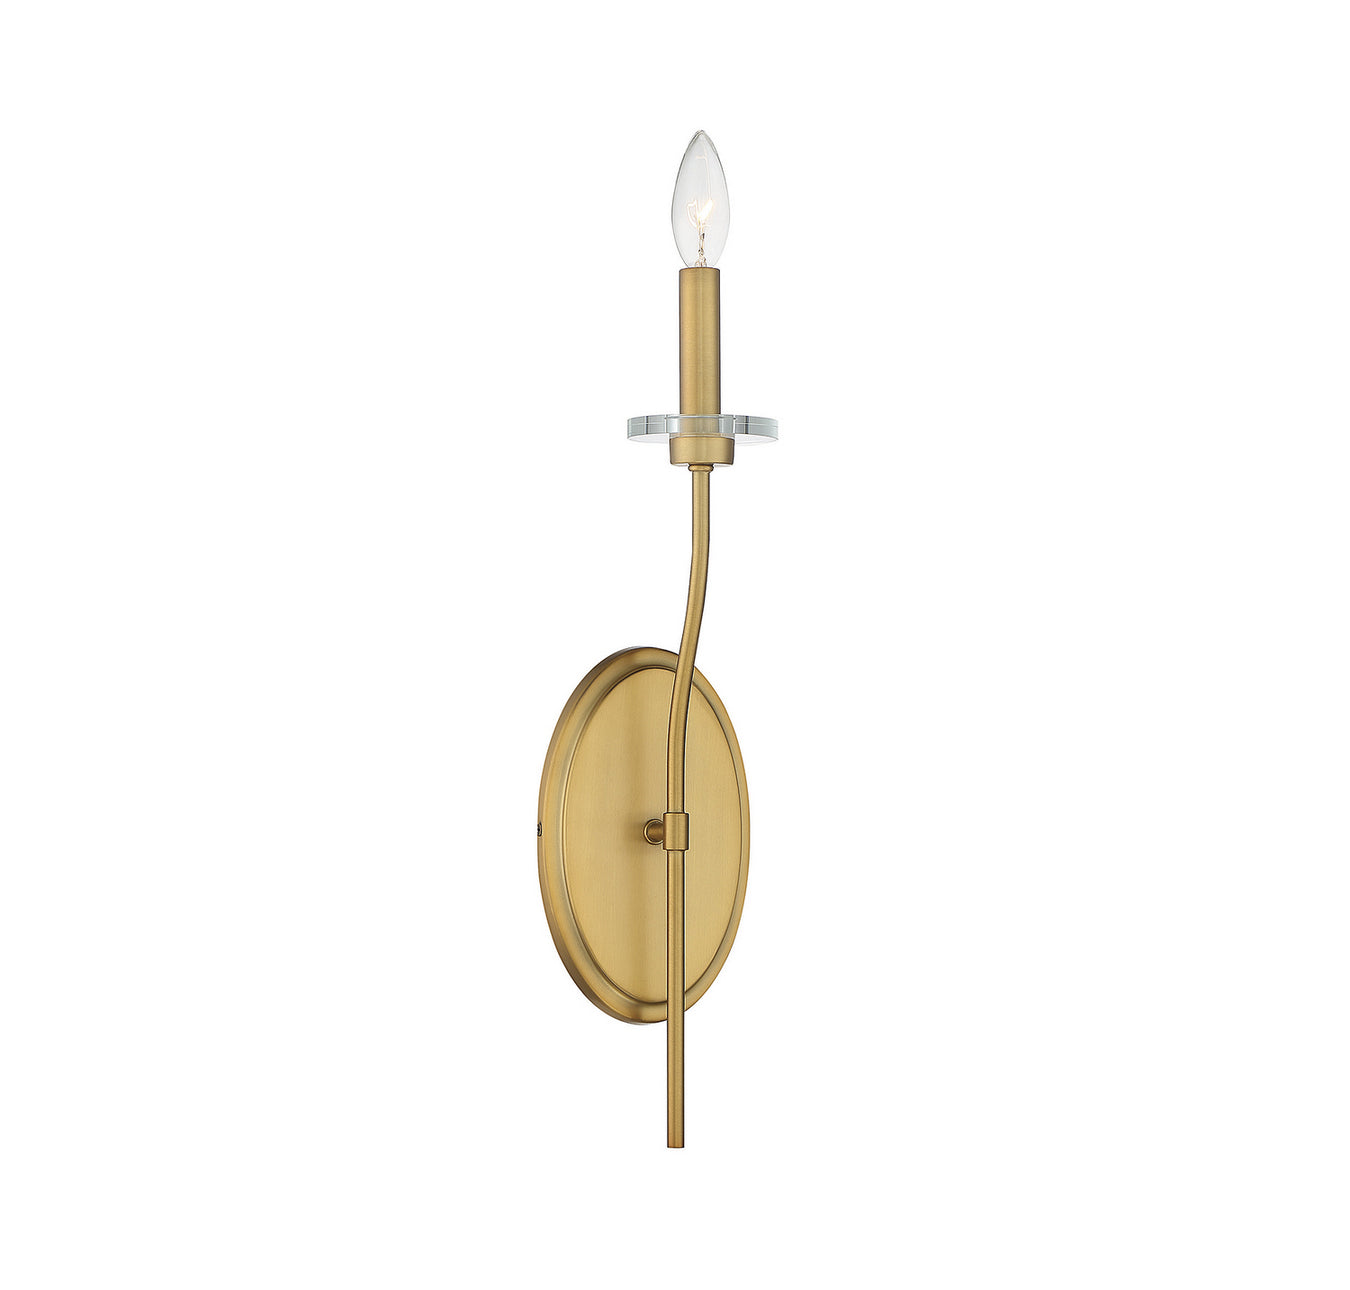 Richfield 1-Light Sconce in Warm Brass - Lamps Expo